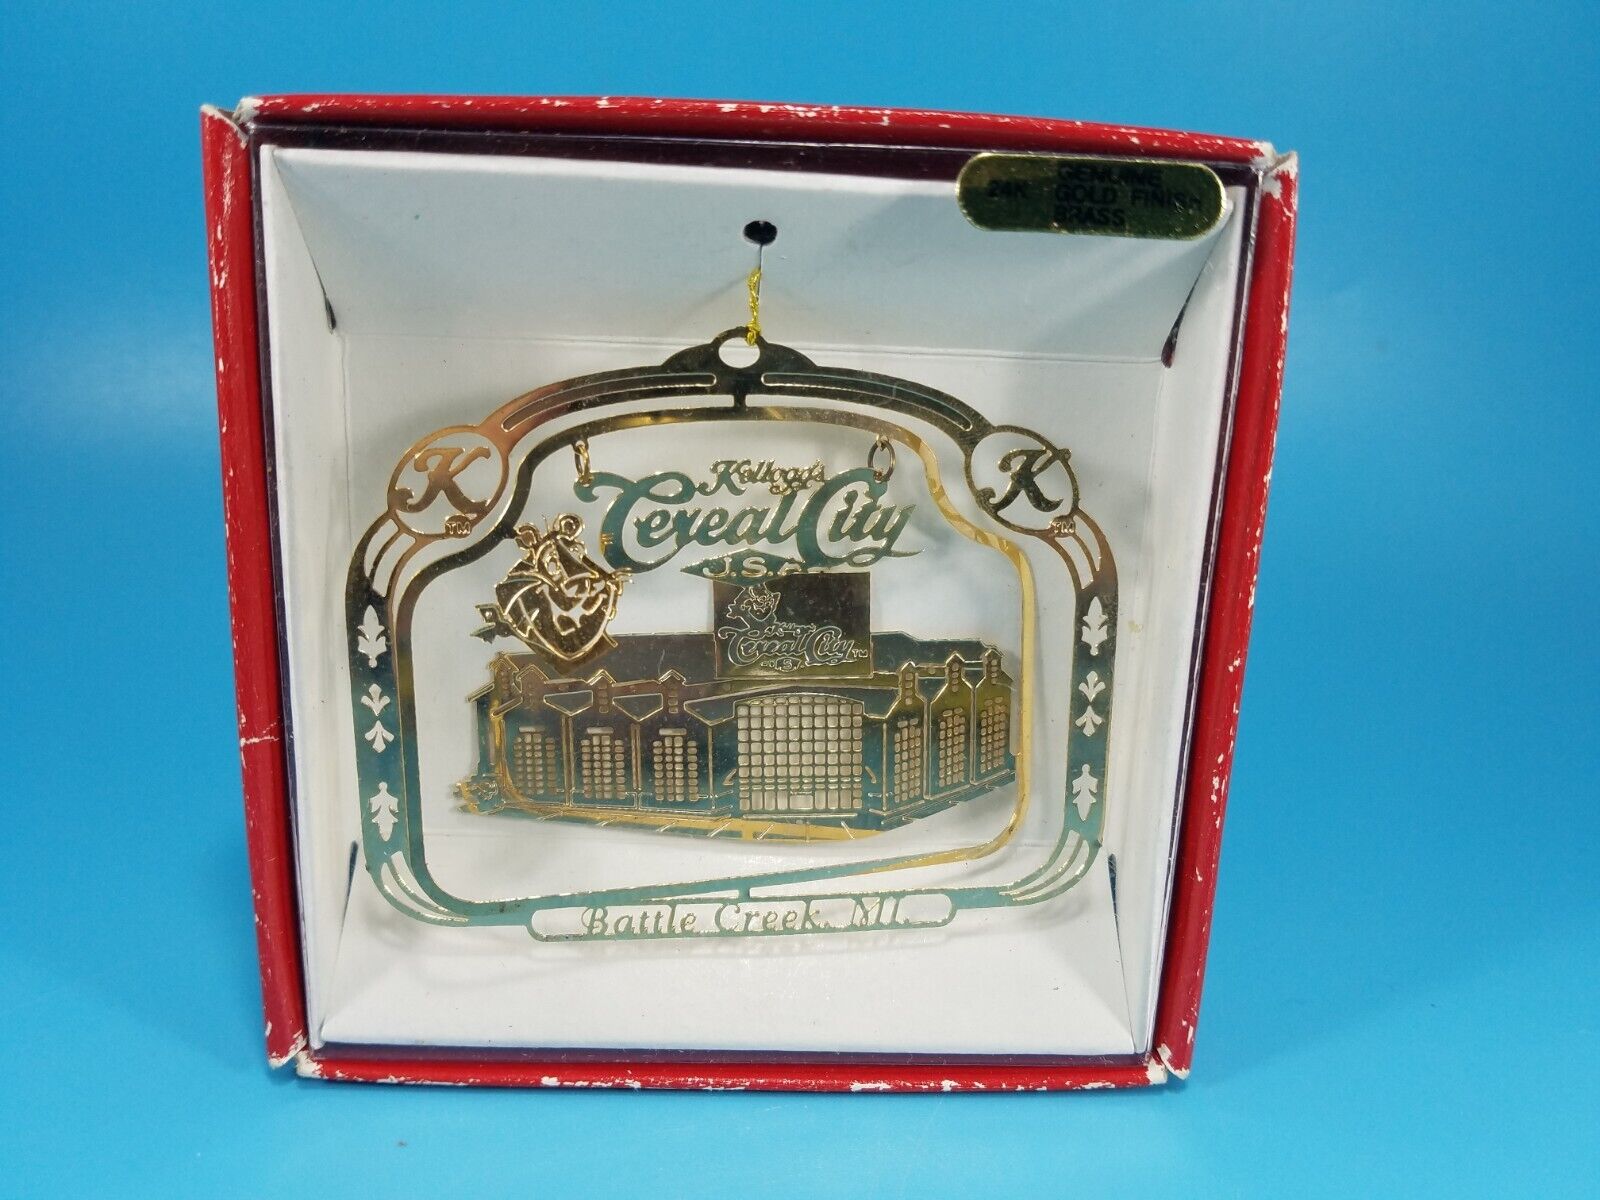 Vintage Nation’s Treasures Kellogg\'s Cereal City Gold Plated Christmas Ornament